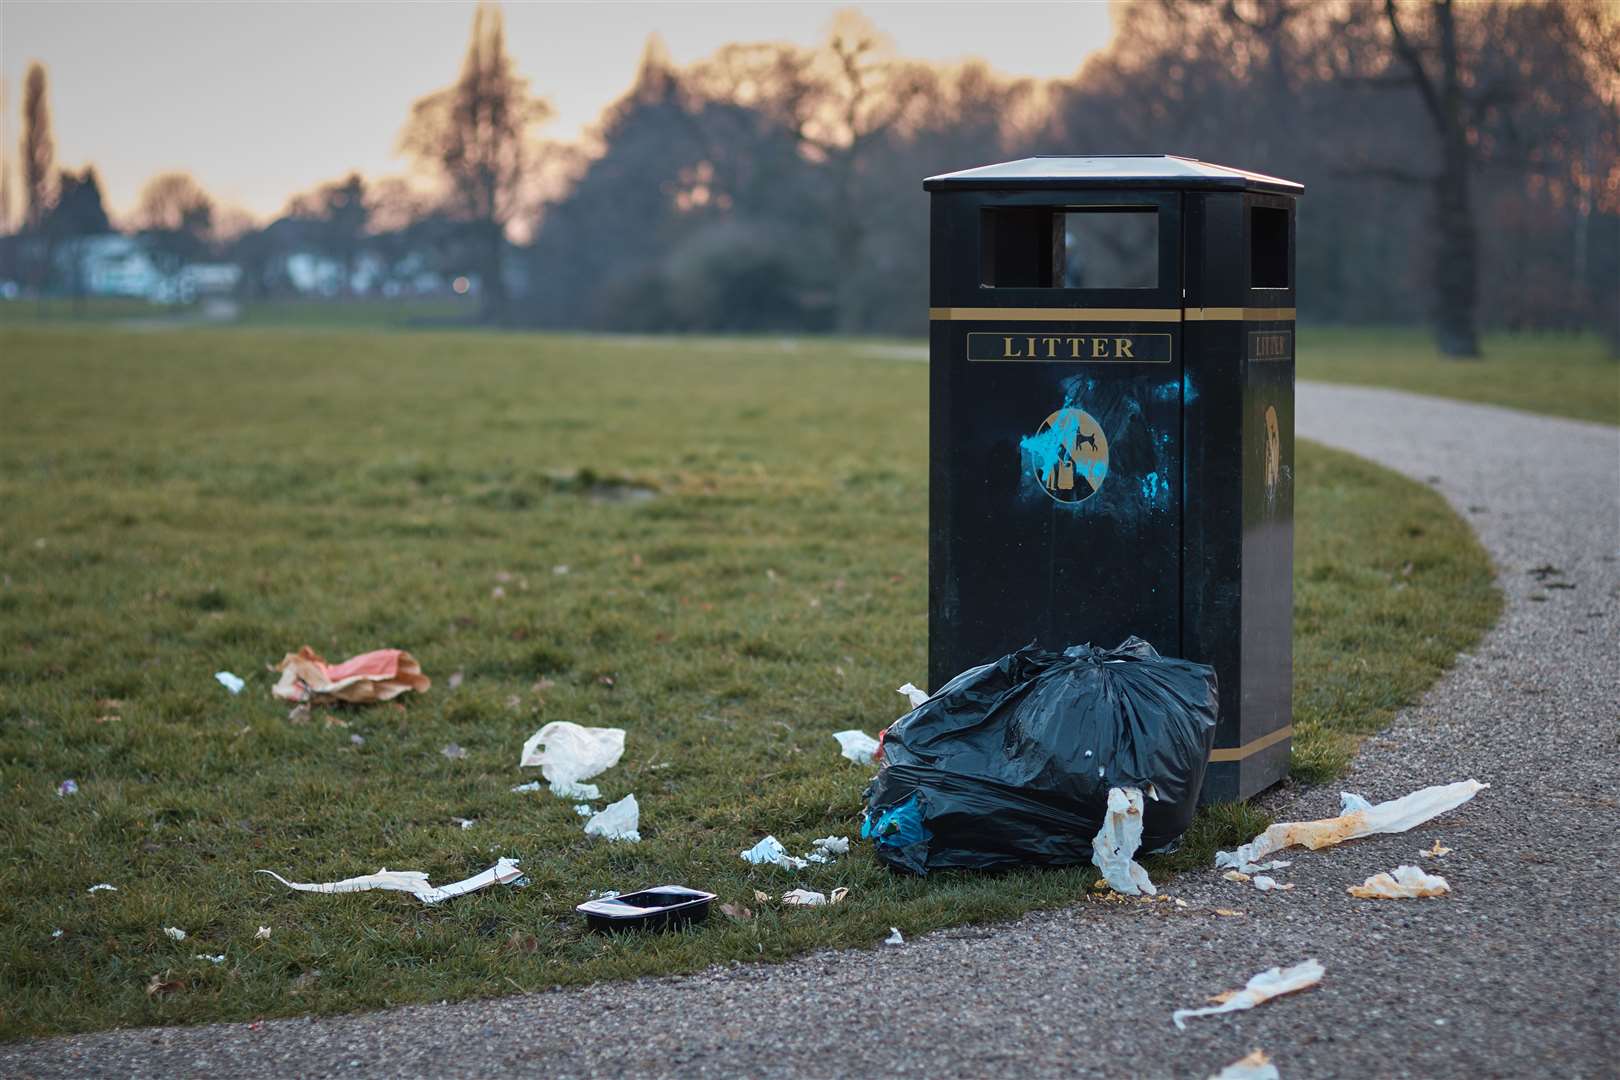 MP David Duguid has raised concerns about littering.